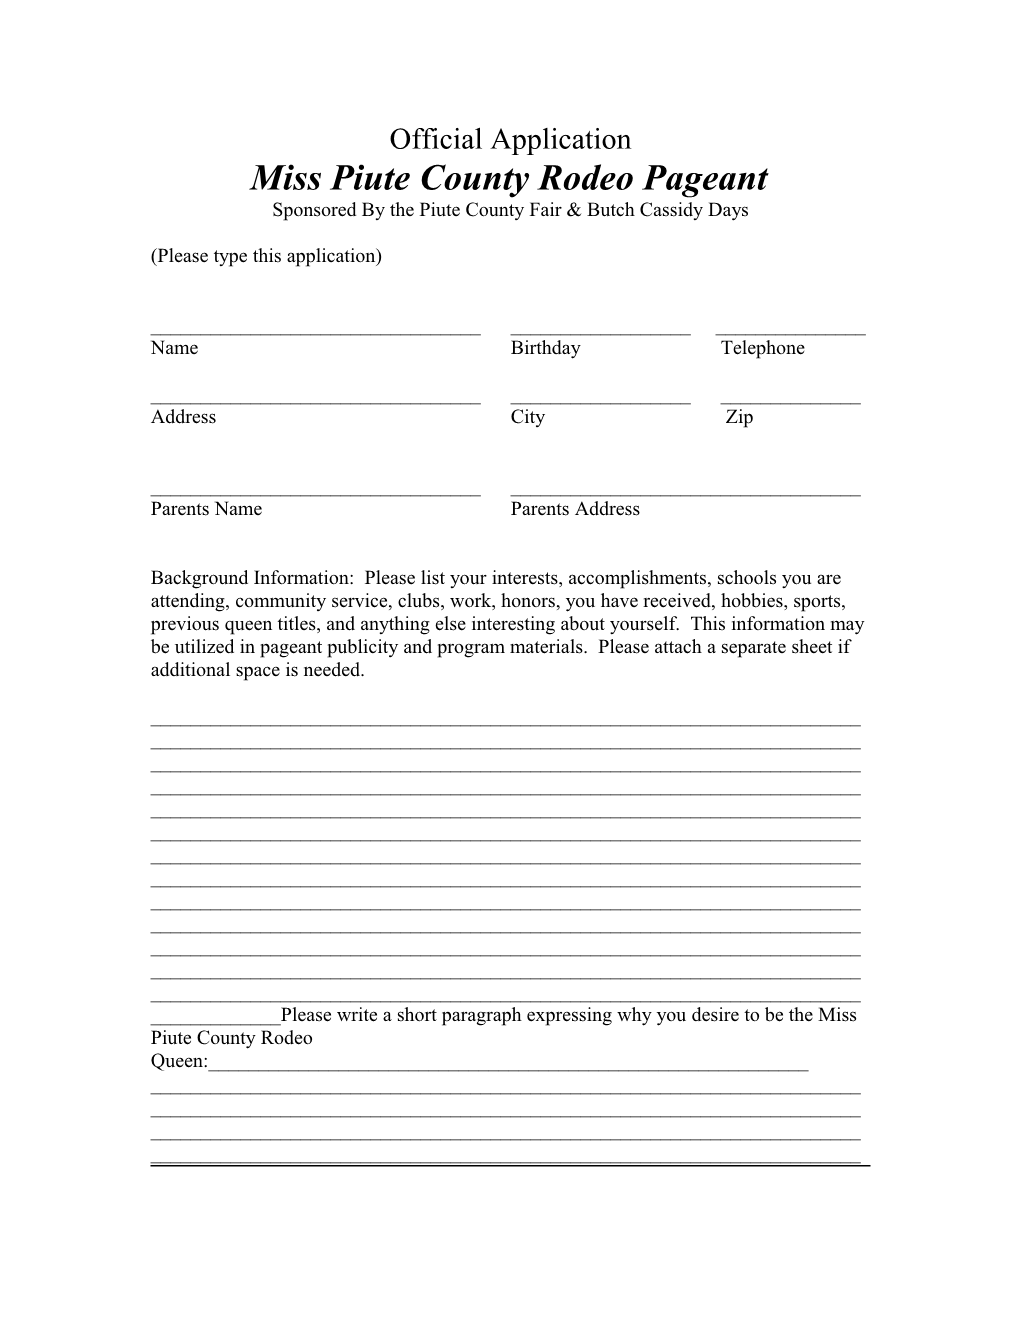 Miss Piute County Rodeo Pageant